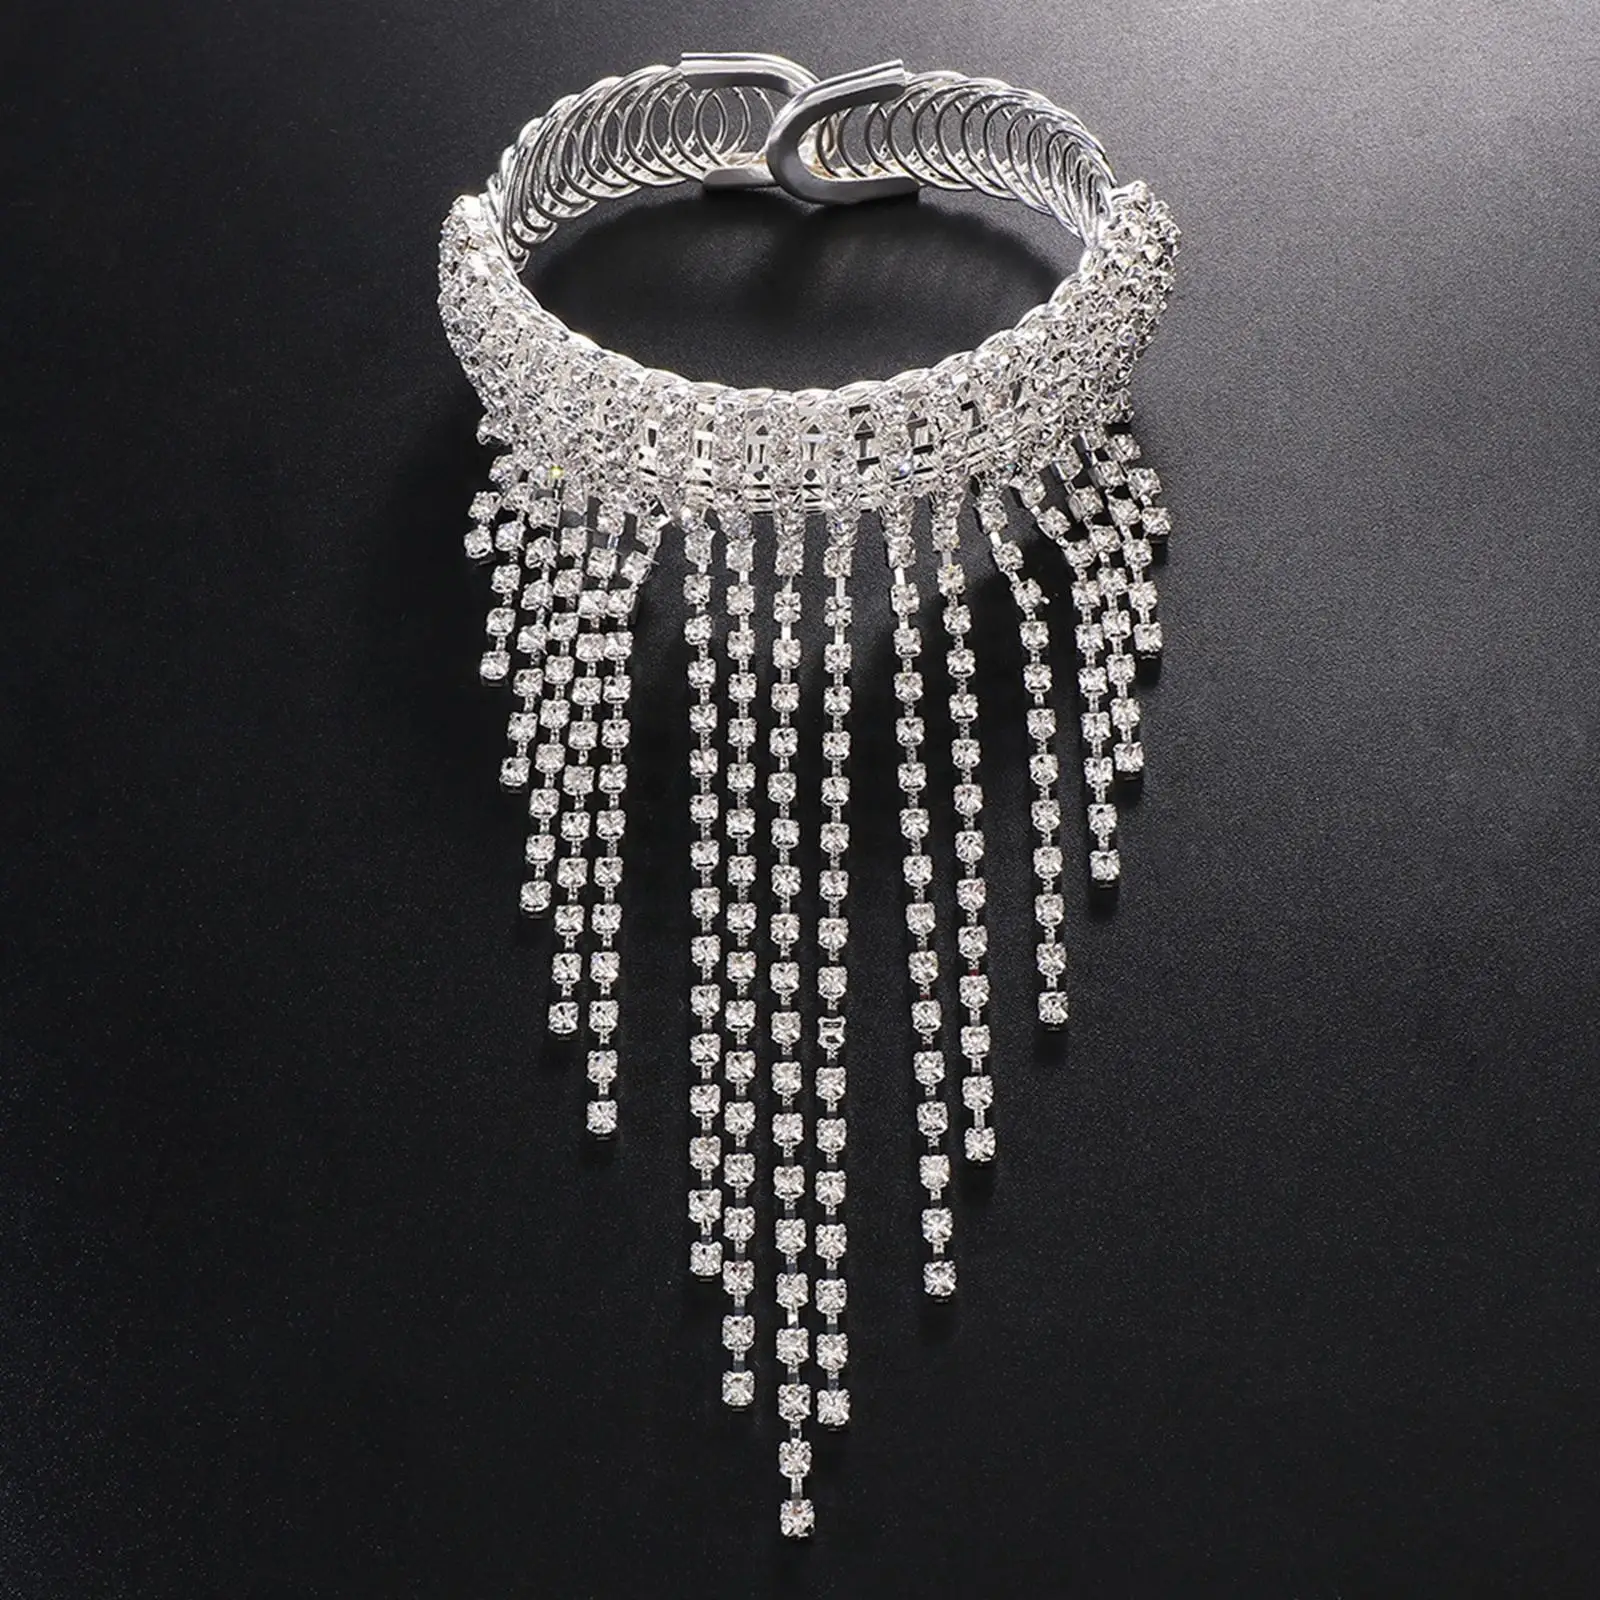 Upper Arm Cuff Bracelet Tassel Chain Silver Armband Armlet for Holiday